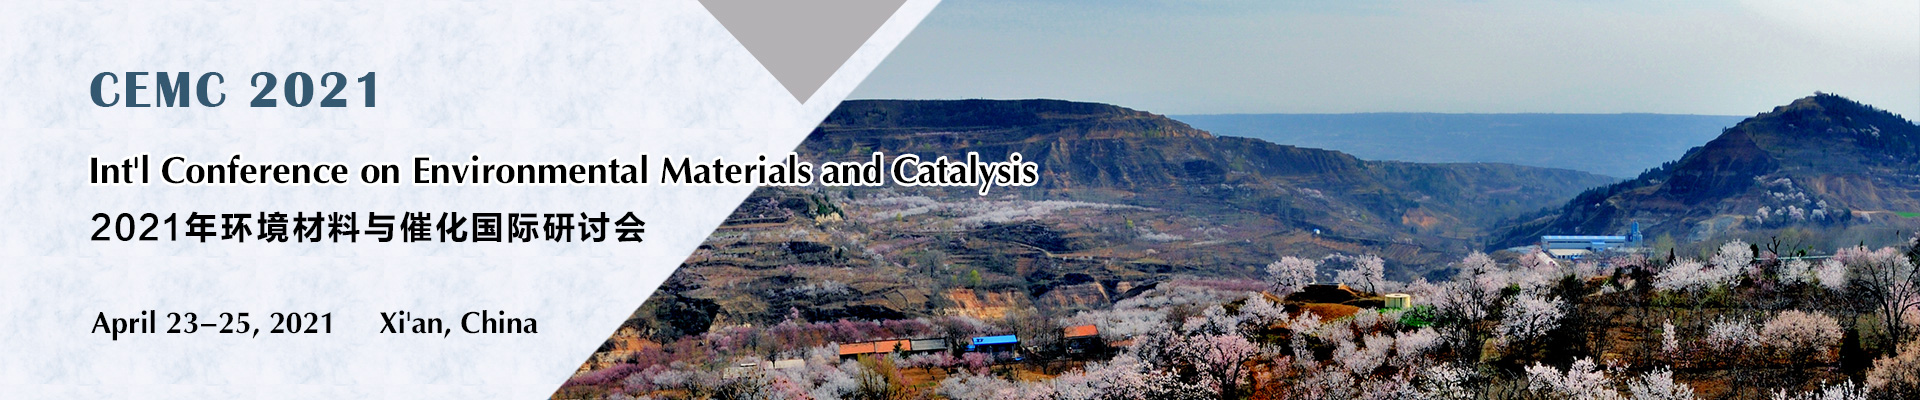 Int'l Conference on Environmental Materials and Catalysis (CEMC 2021), Xi'an, Shaanxi, China